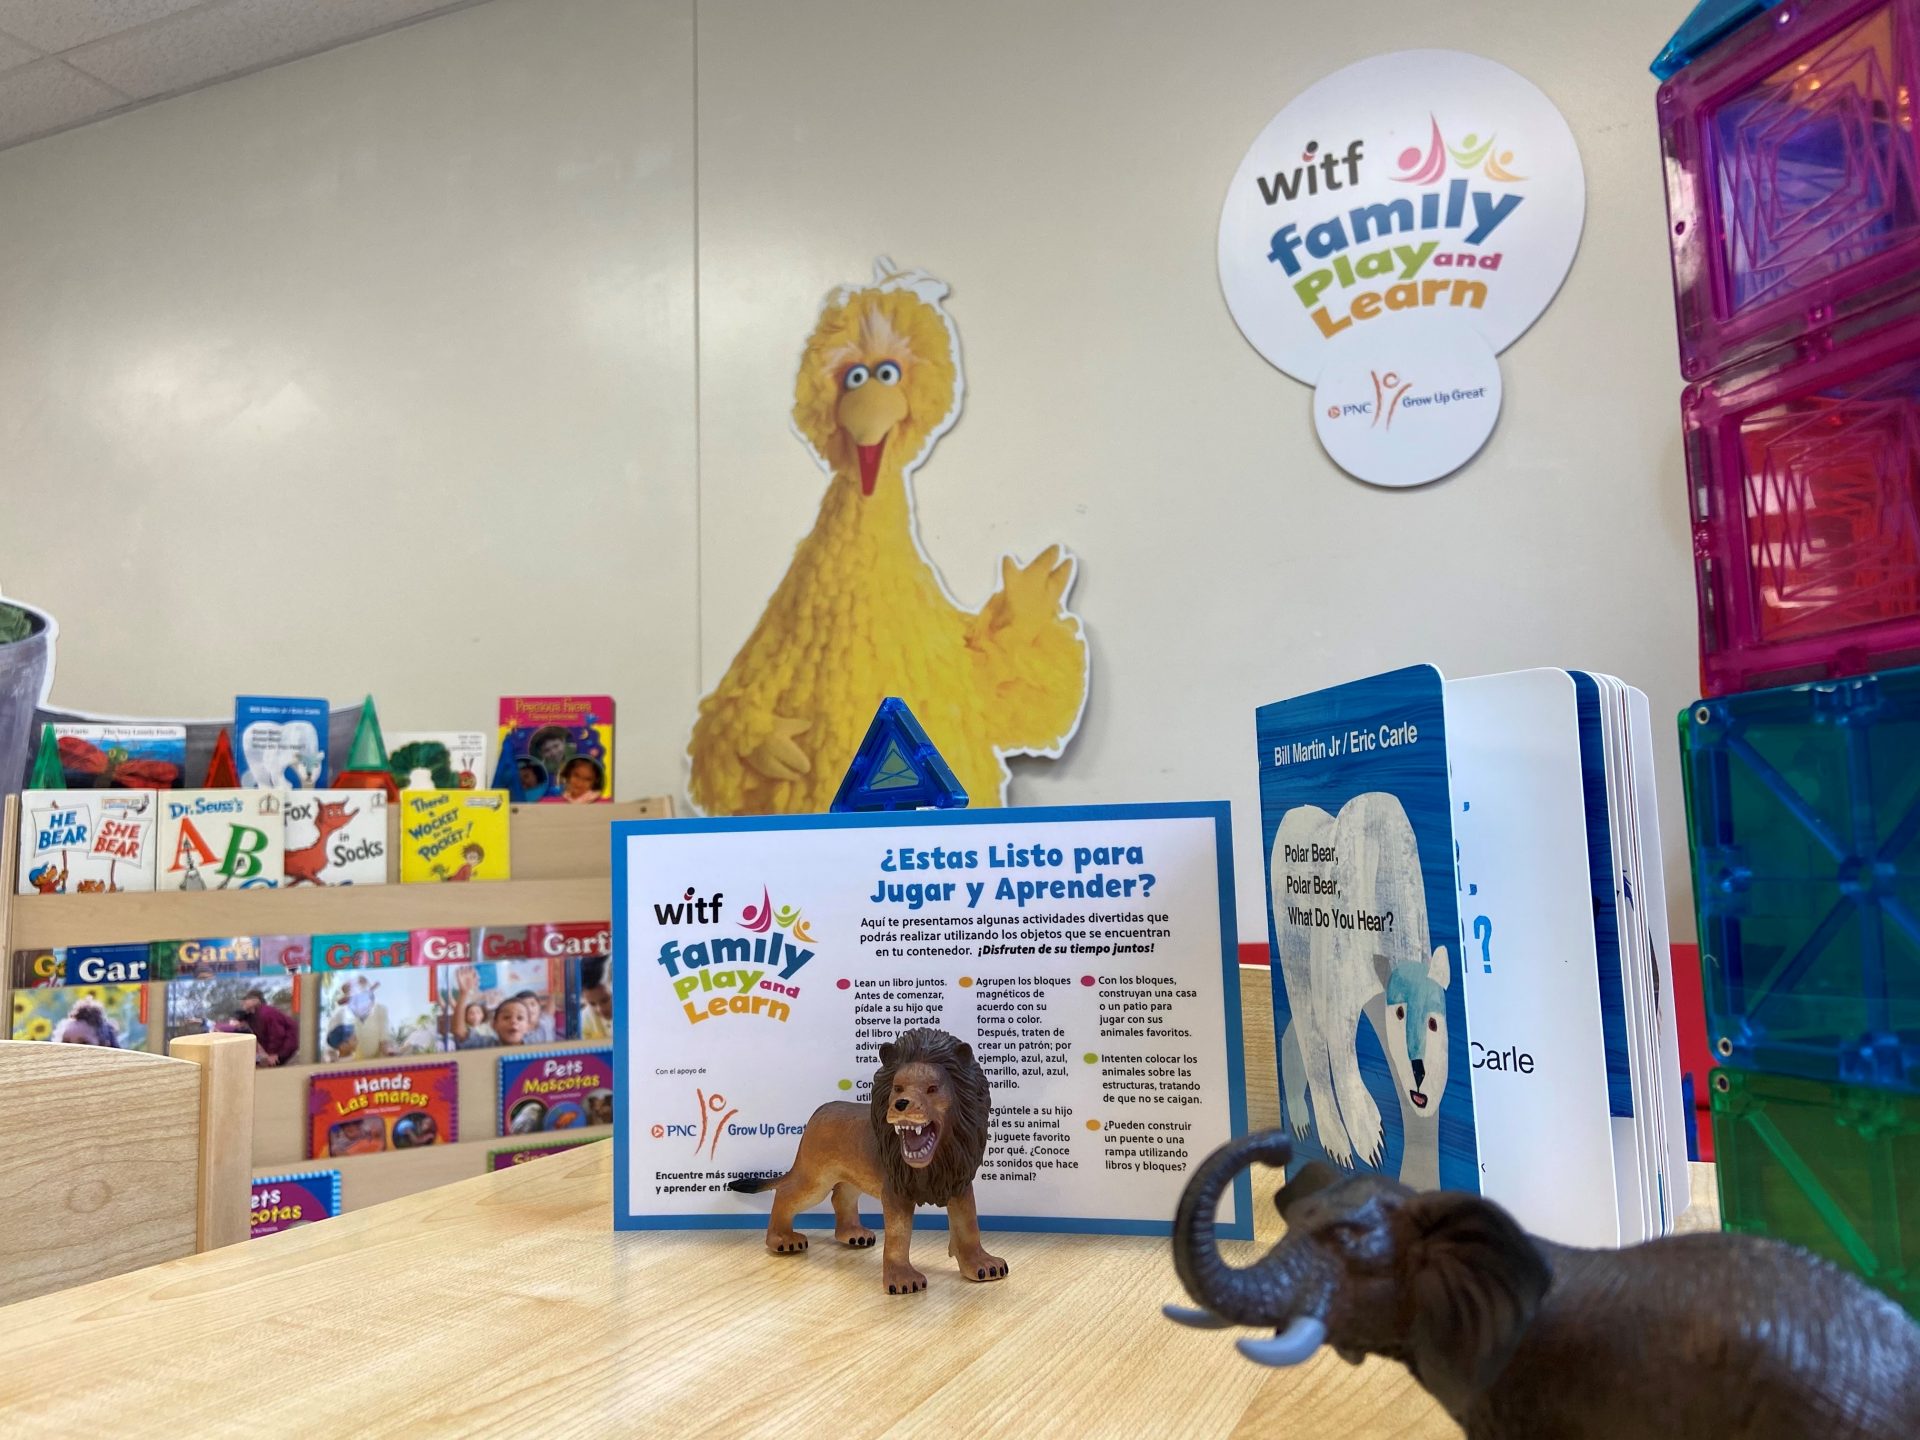 When families arrive at a WITF Family Play and Learn, they can sign out an activity bin filled with bilingual books, animal figurines, magnet blocks and a double-sided Activity Idea card in English and Spanish just for them. On site staff sanitize items before going to the next family.